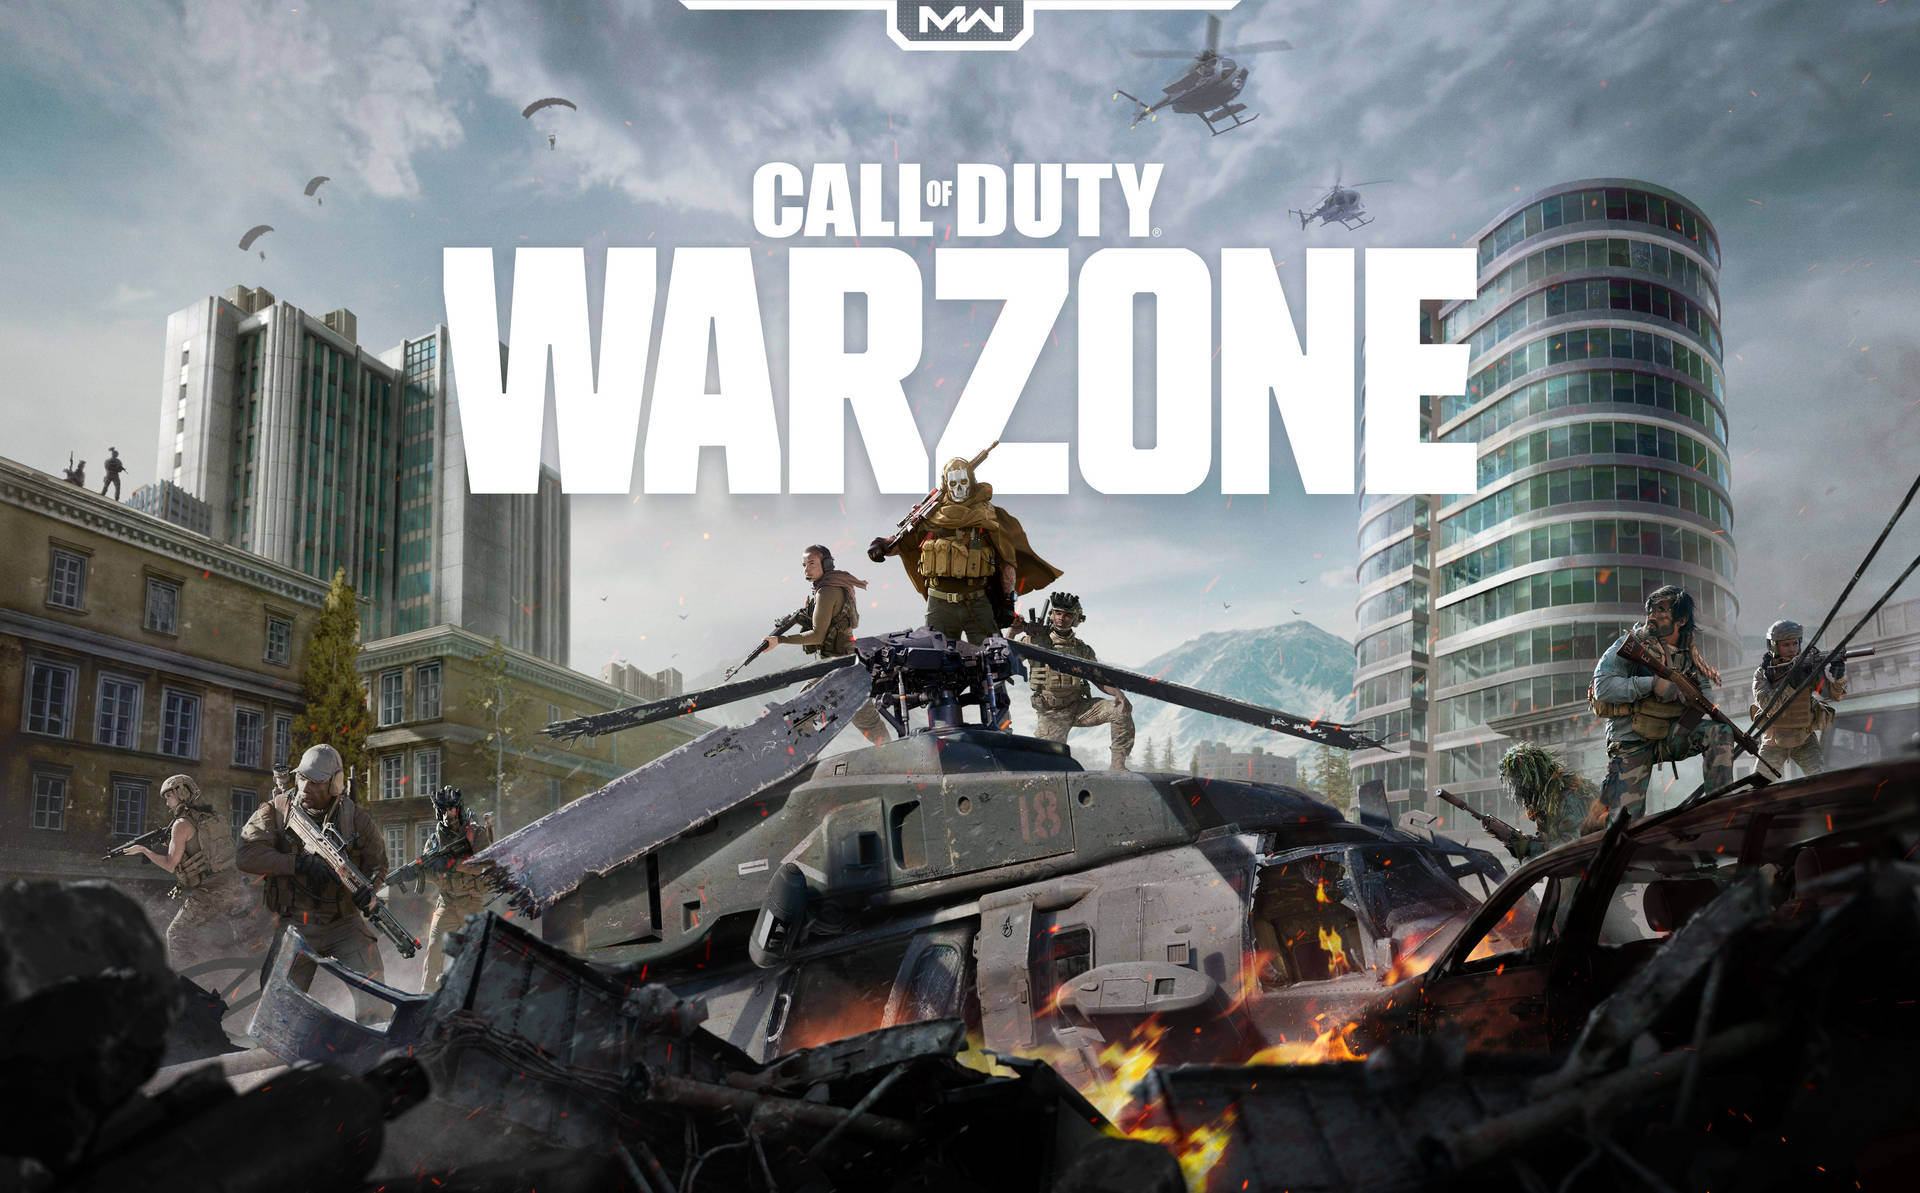 Call Of Duty Warzone 4K Crashed Helicopter Wallpaper